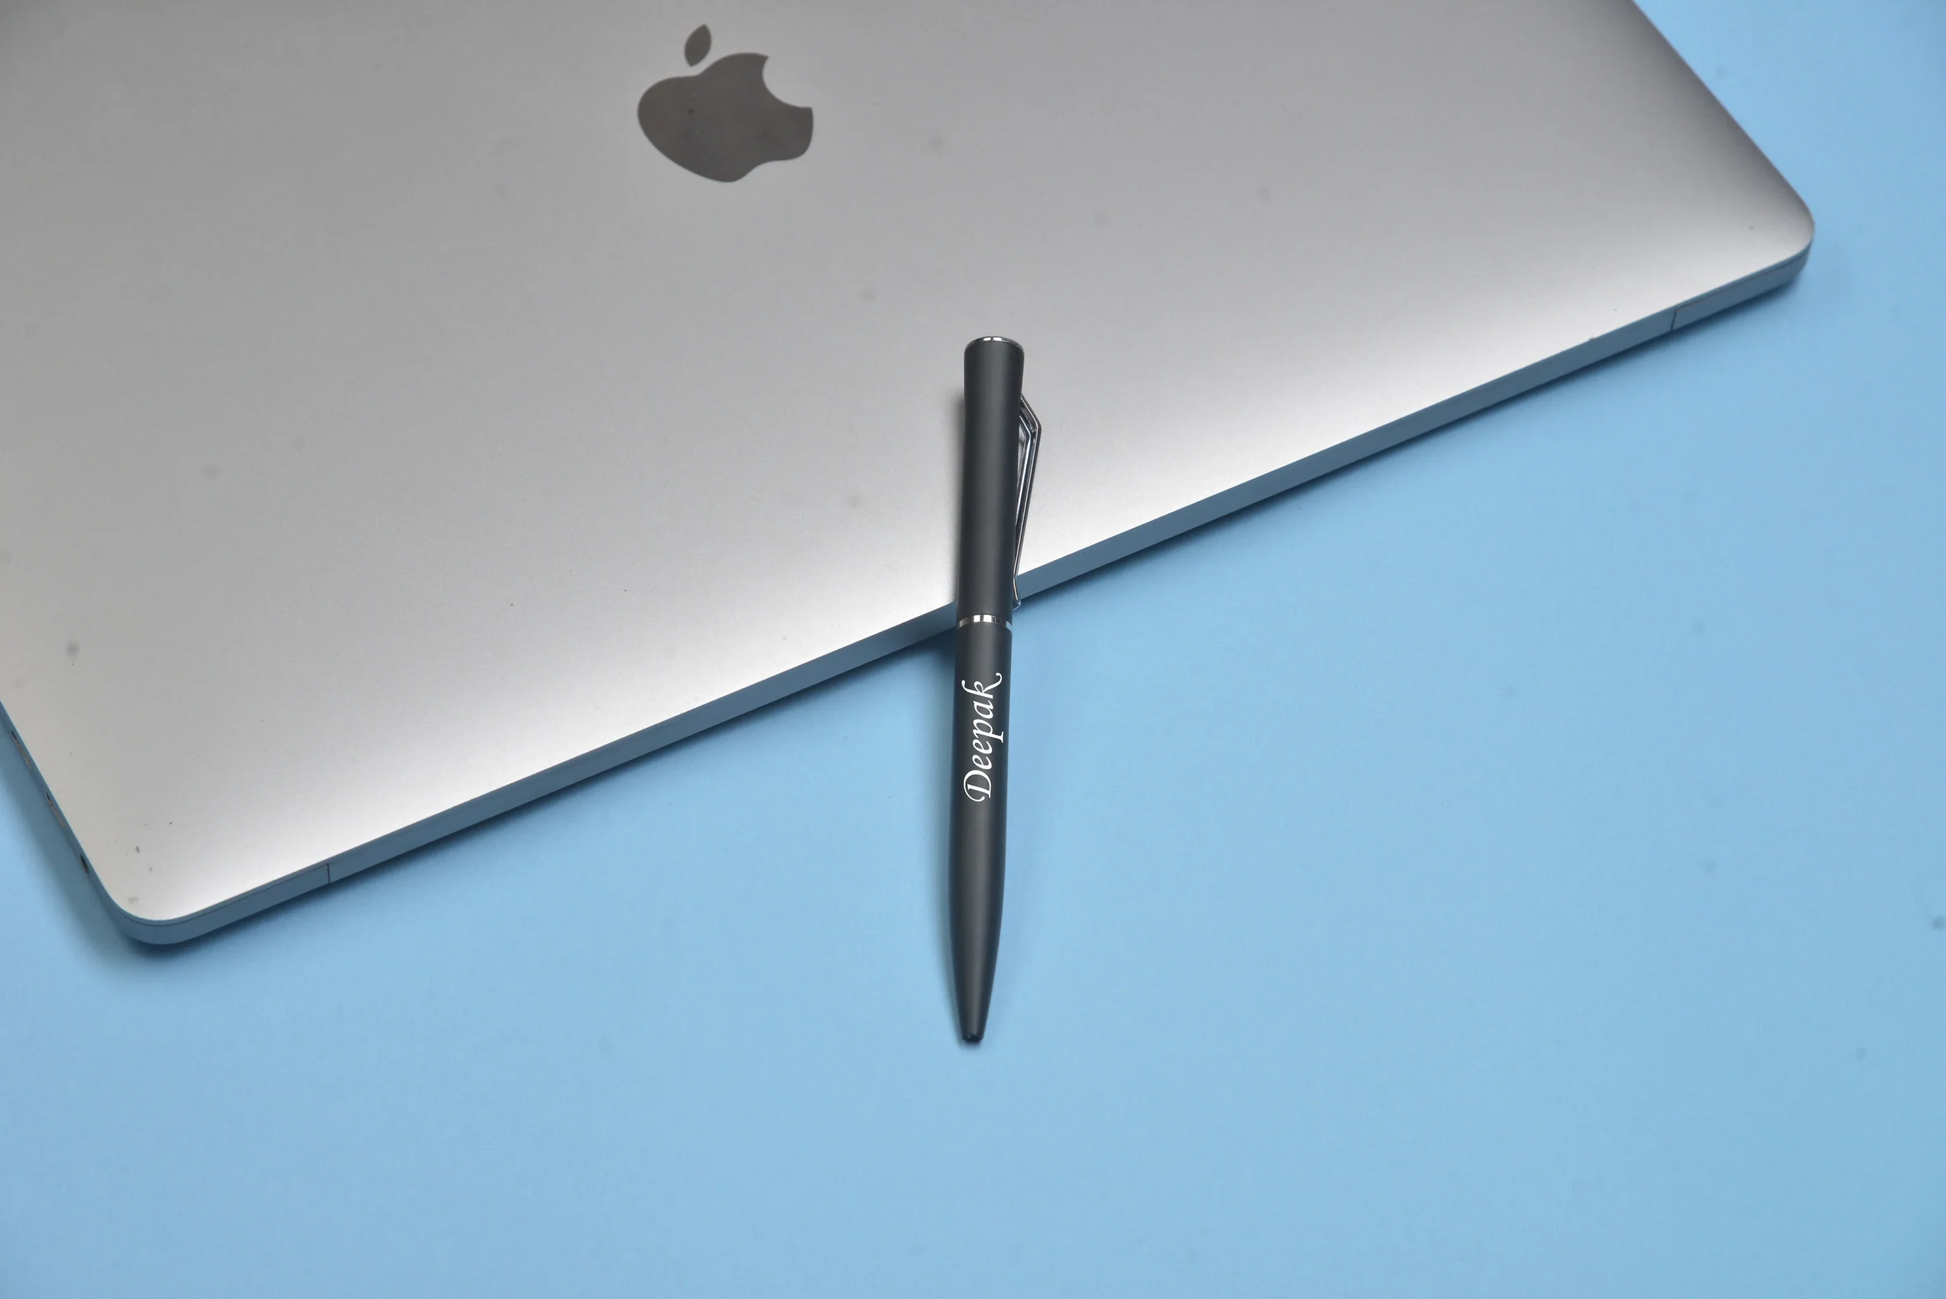 "Elevate your writing experience with our smooth and reliable pen. Perfect for journaling, note-taking, and everyday writing tasks."